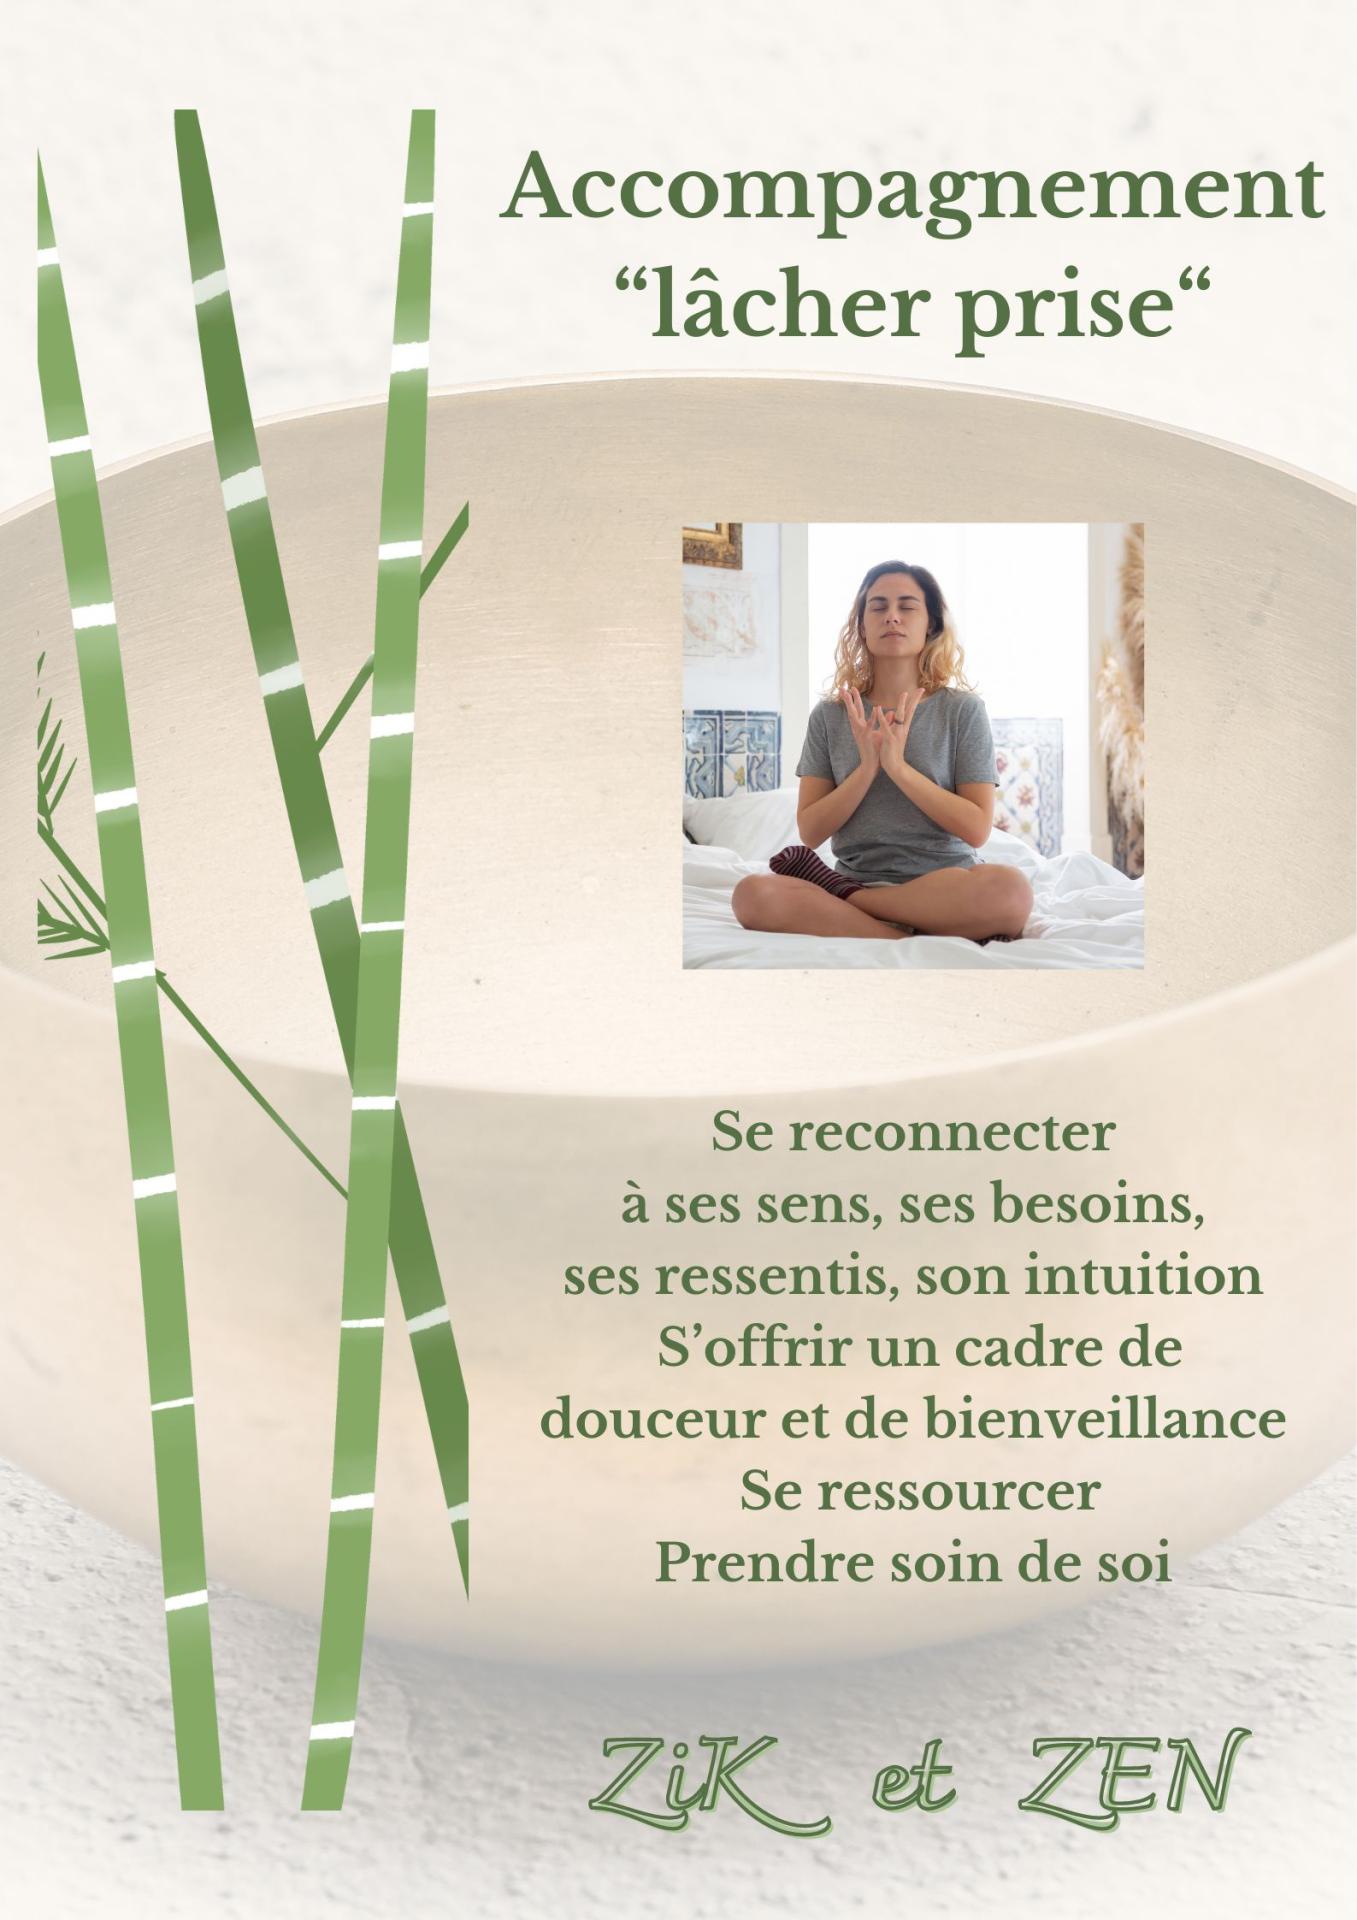 Accompagnement lacher prise